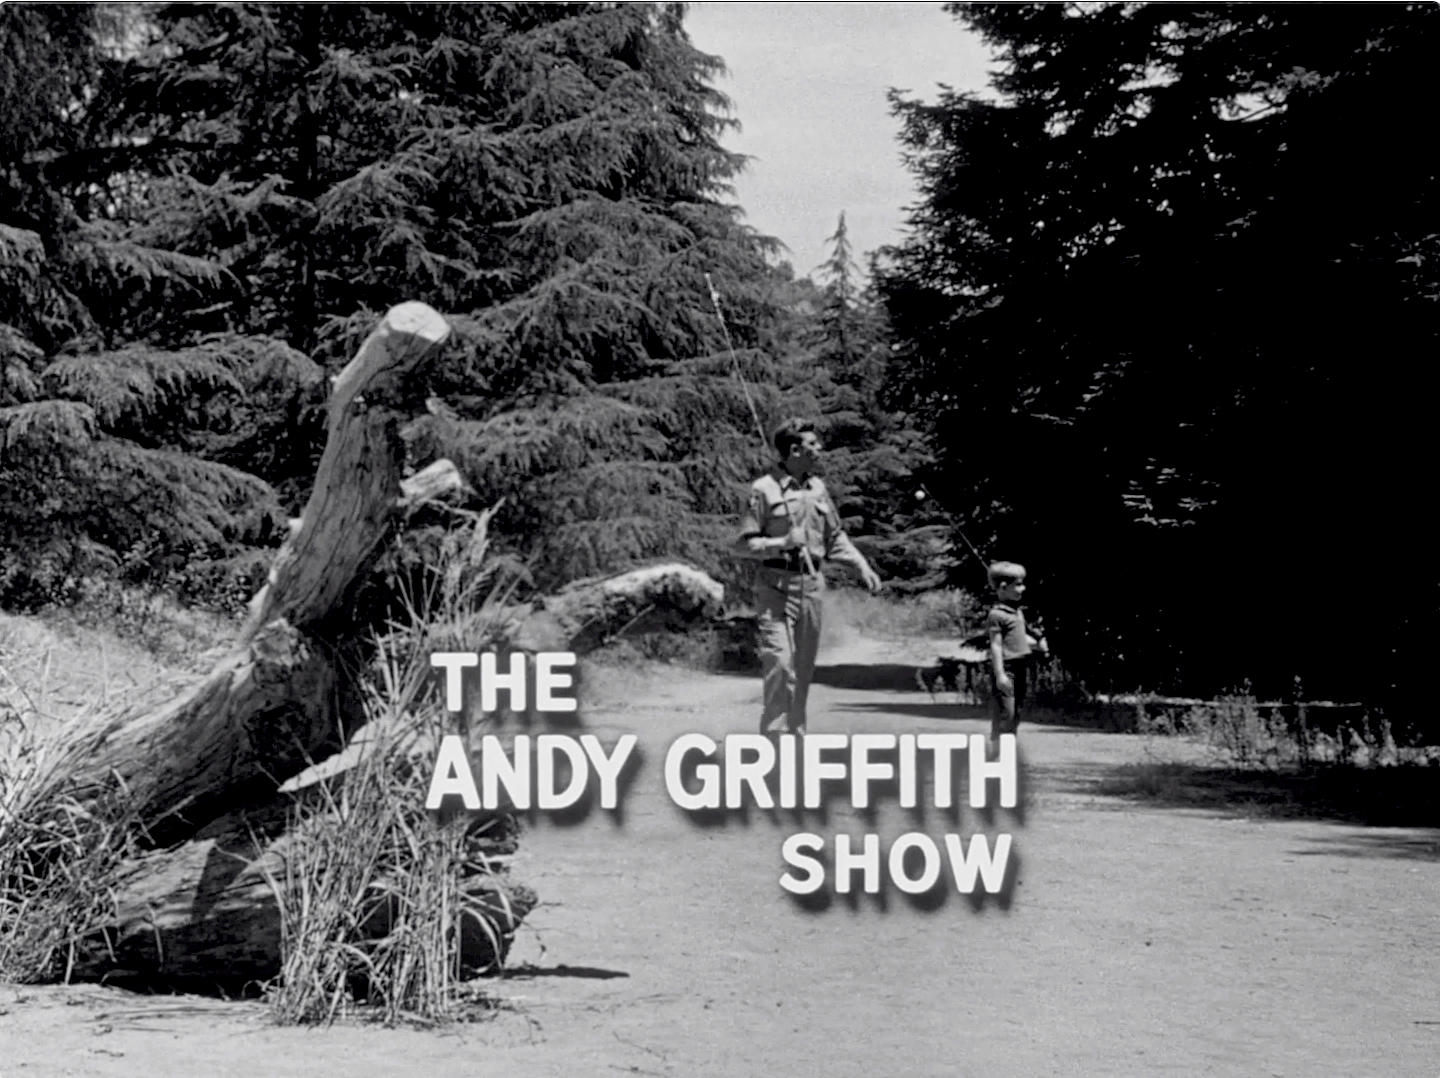 The Andy Griffith Show S04E05 Briscoe Declares for Aunt Bee (Oct.28.1963)-3.jpg